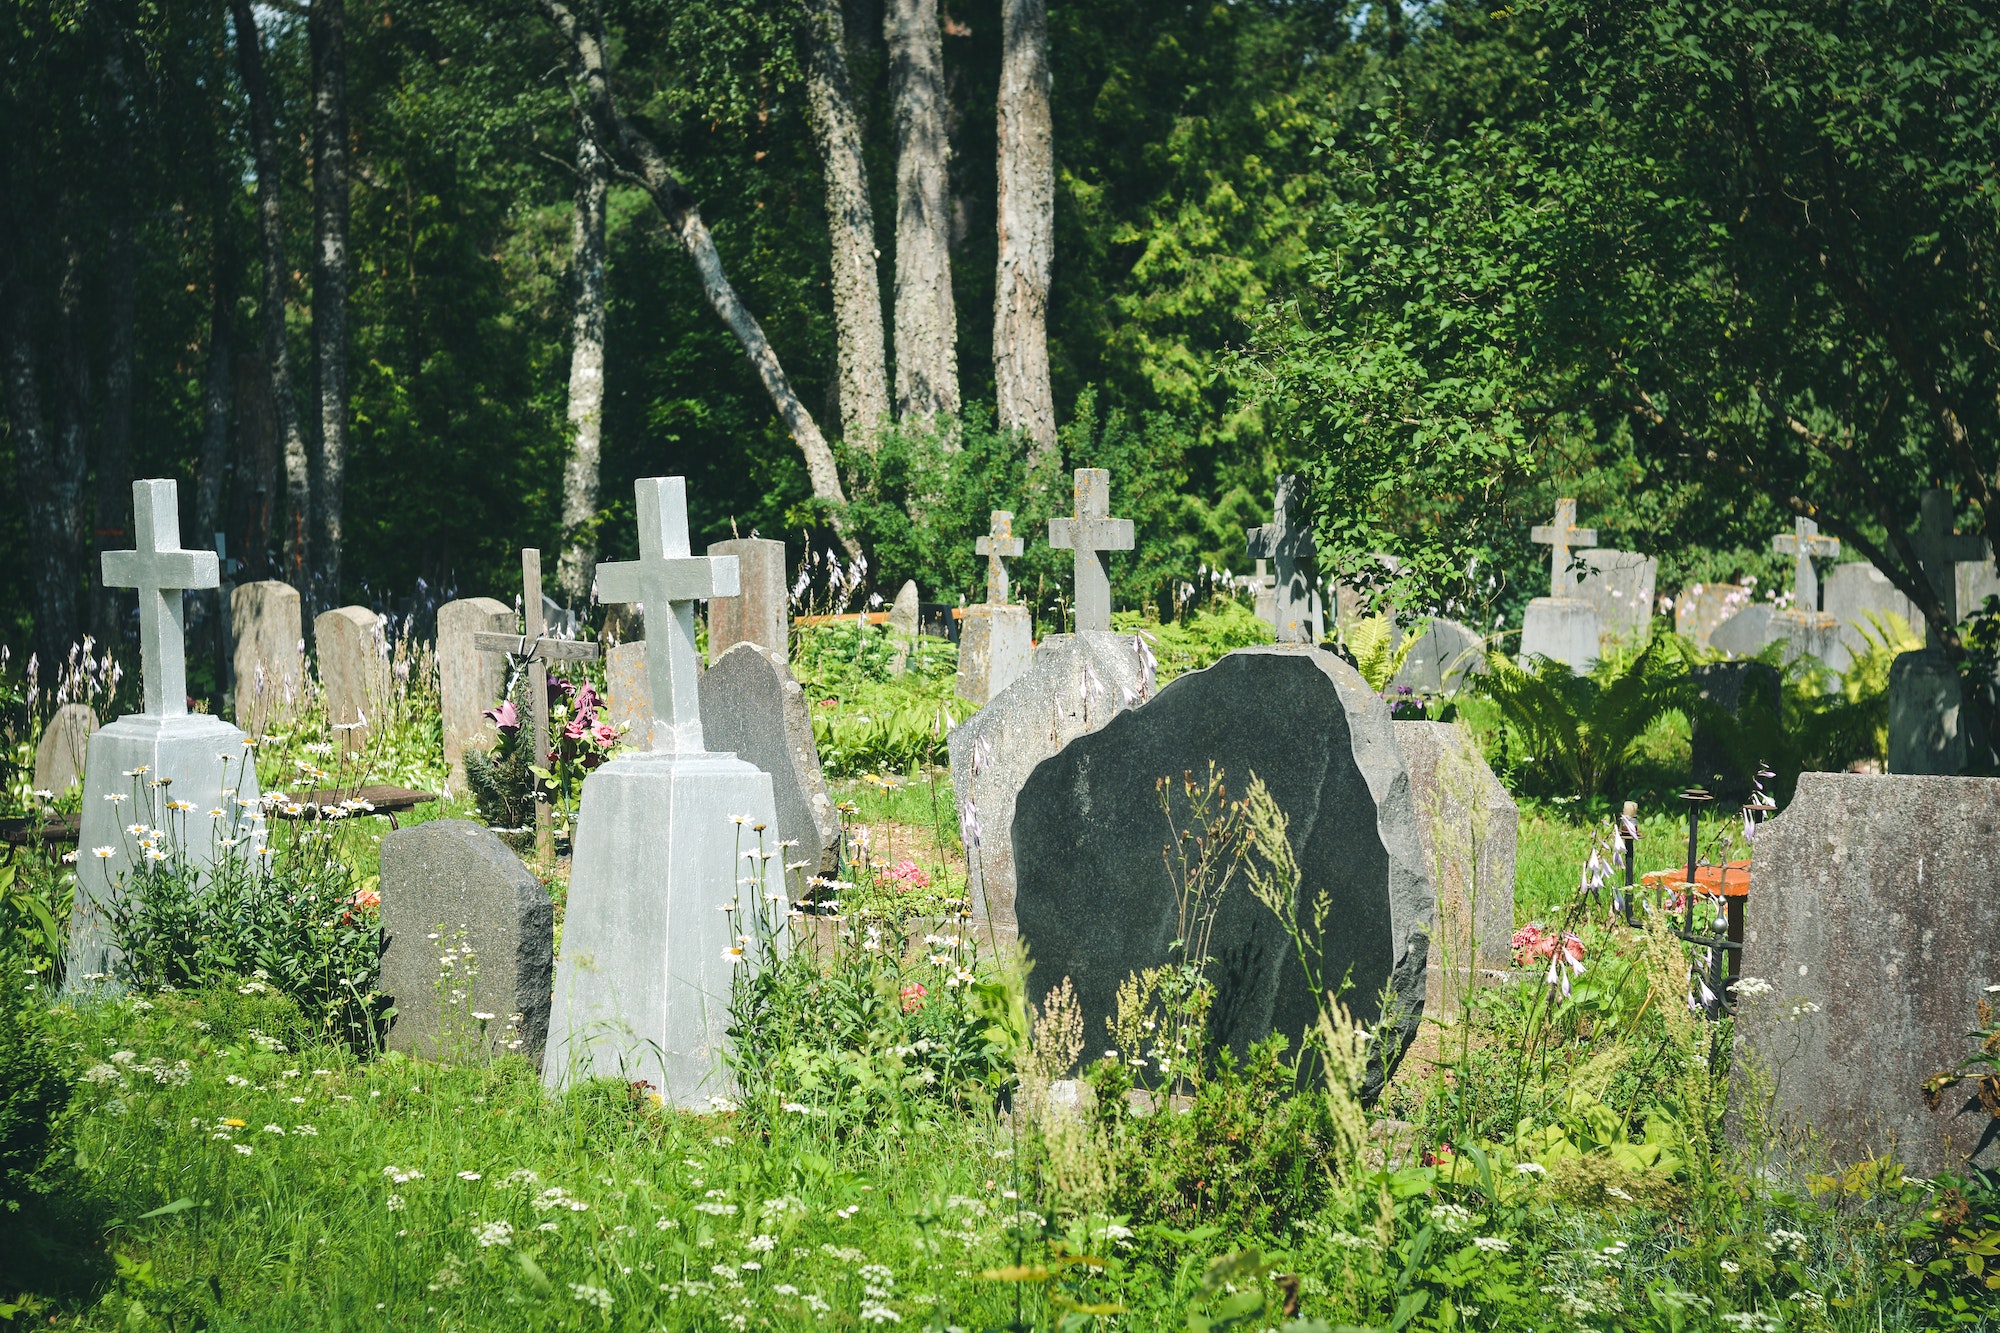 Graves with grave stones at a cemetery in summer. Granite crosses in the cemetery